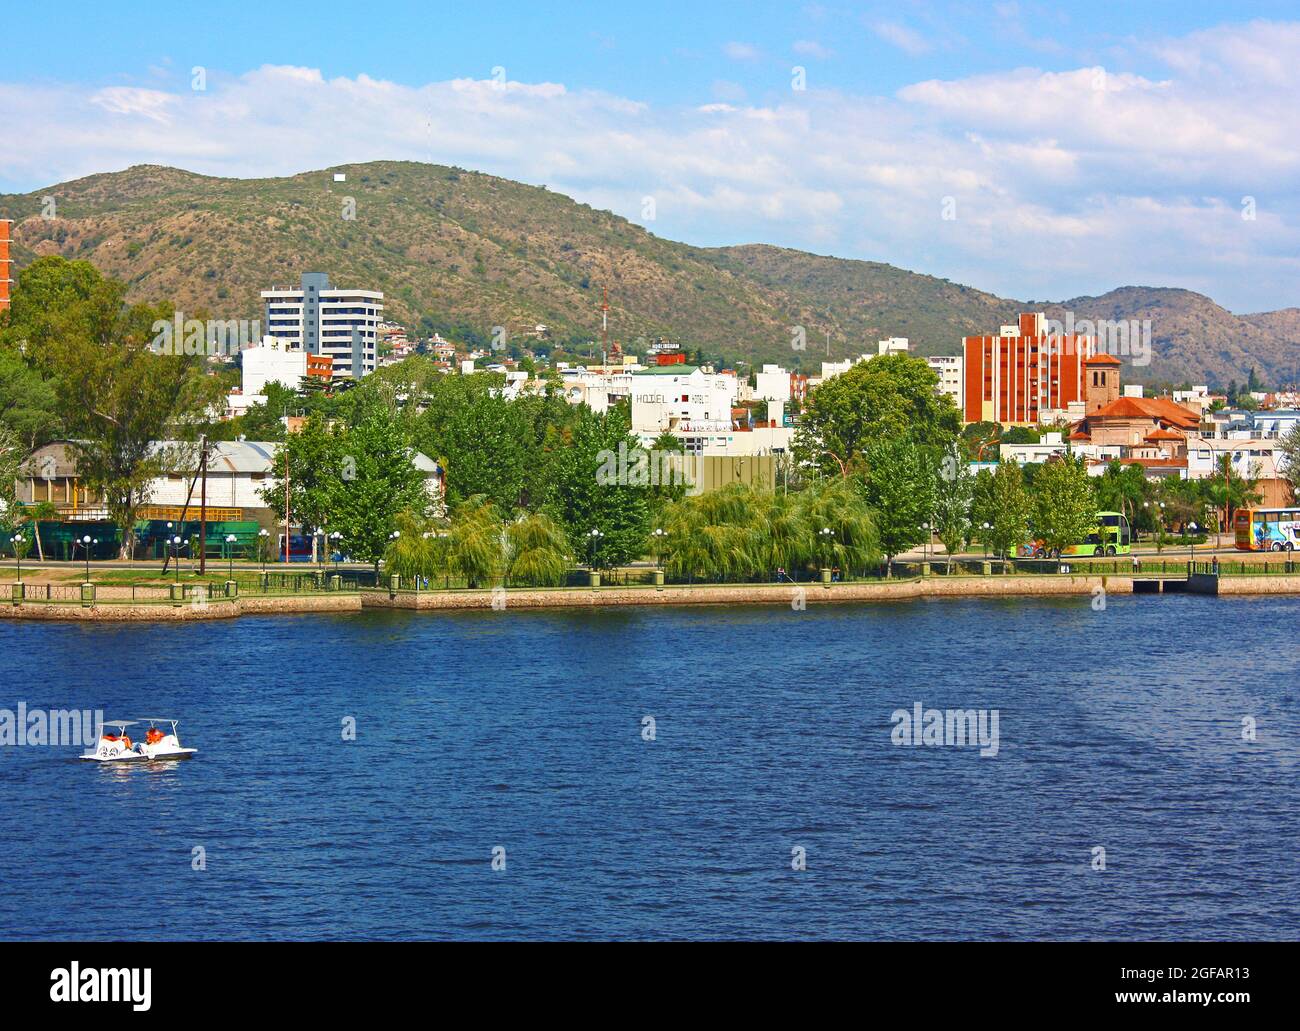 VILLA CARLOS PAZ, CORDOBA, ARGENTINA The Town in a sunny day. The San Roque lake in foreground and the hills at the background. Stock Photo